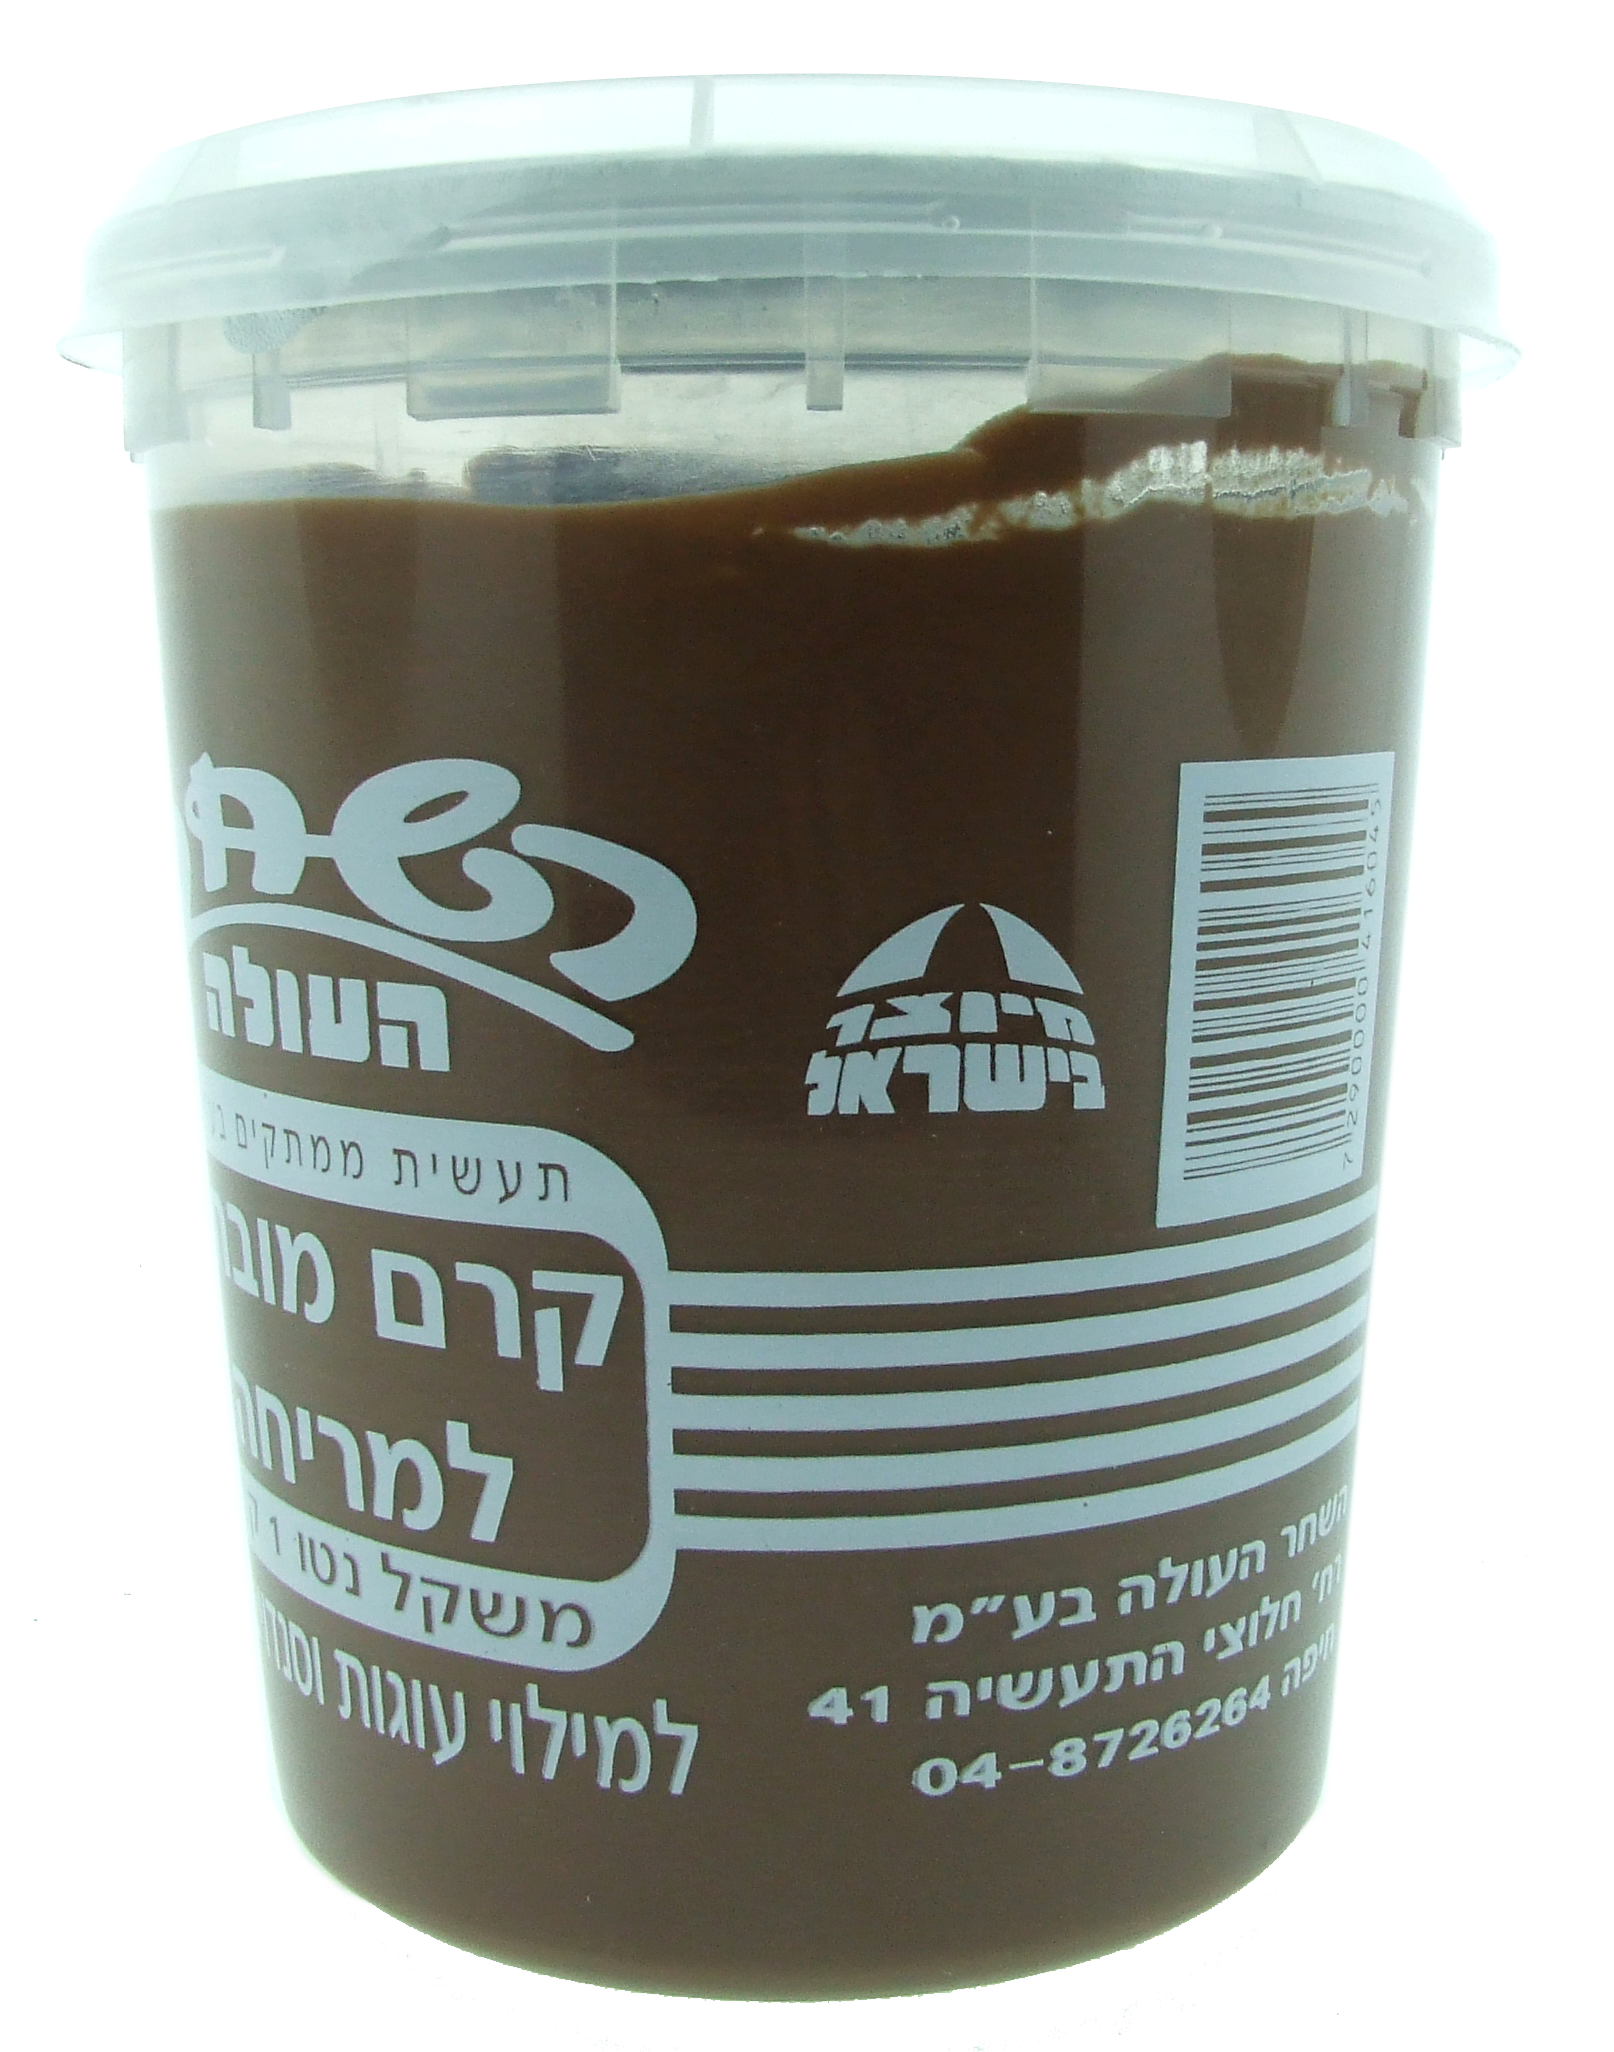 The Famous Israeli Chocolate Spread for Sale at Israeli Food Sup